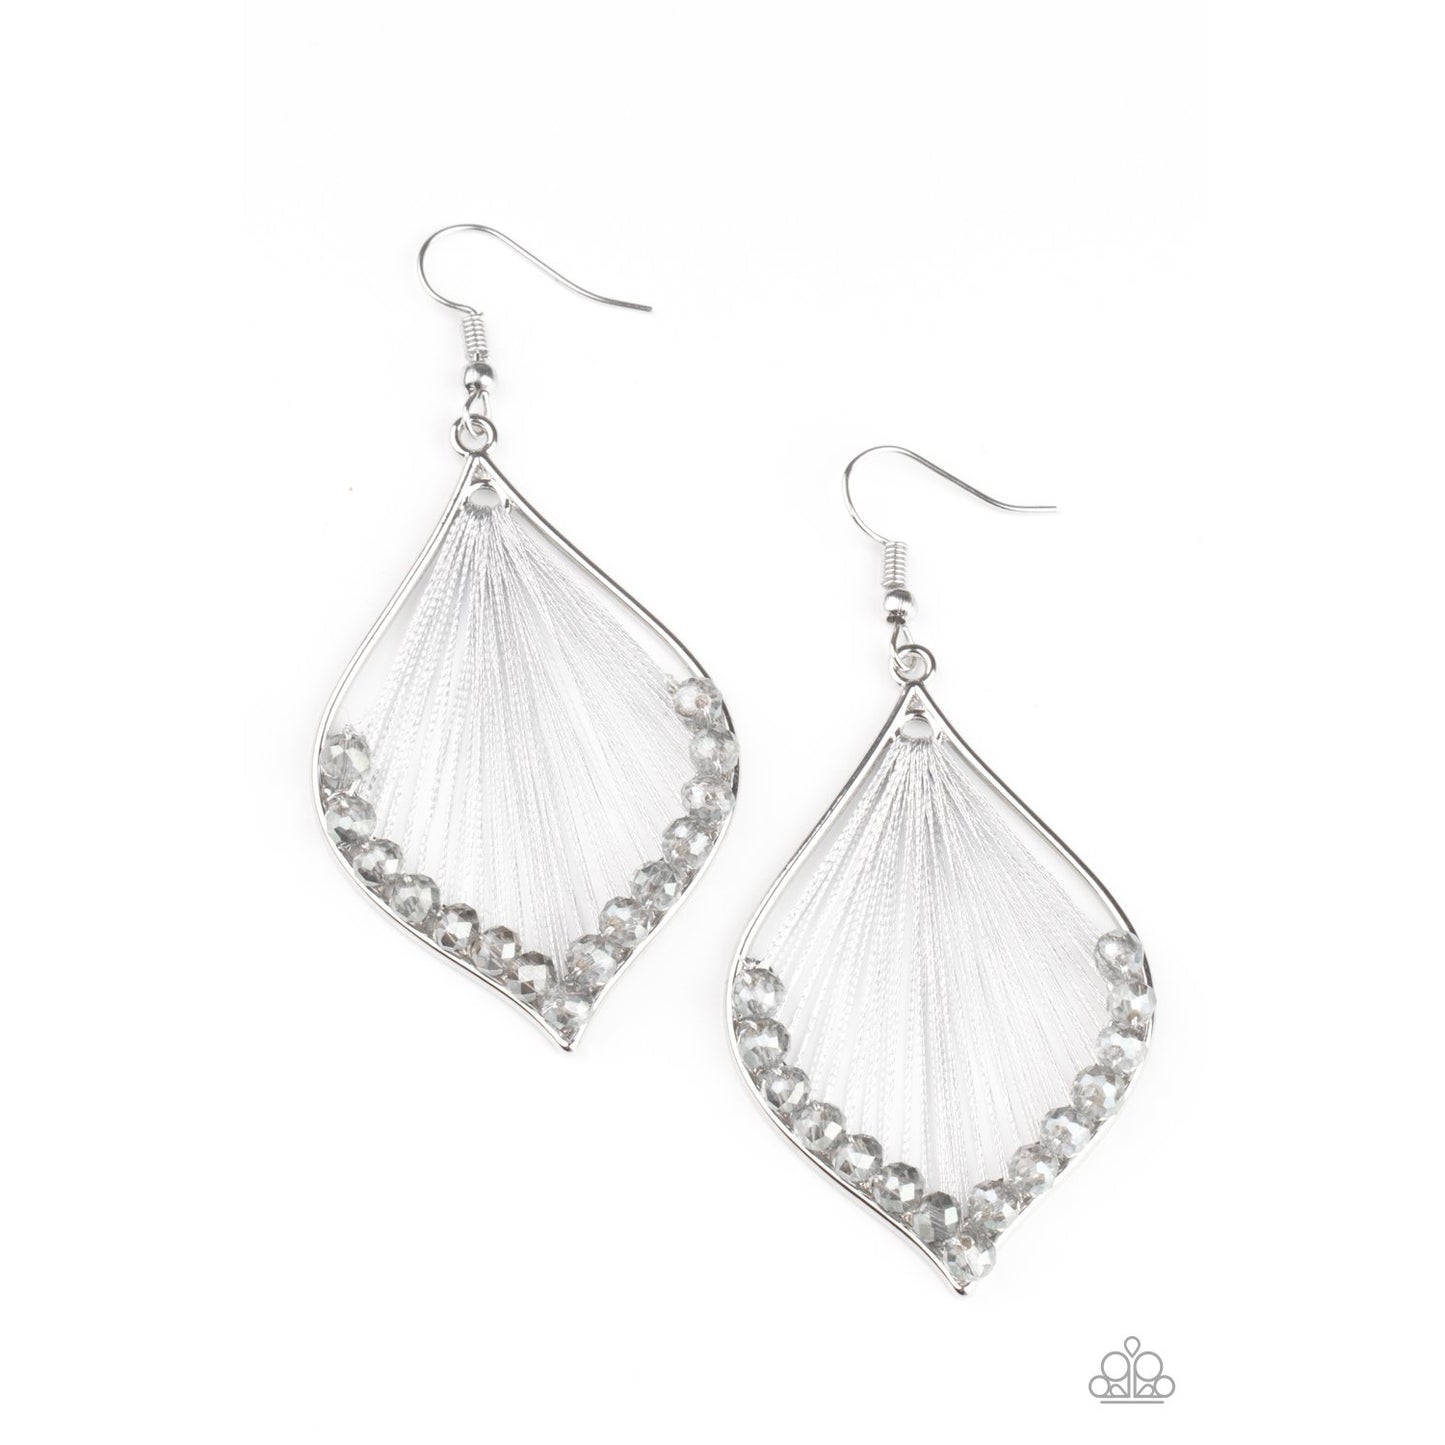 Pulling at My HARP-strings - Silver Earrings - Paparazzi Accessories - GlaMarous Titi Jewels